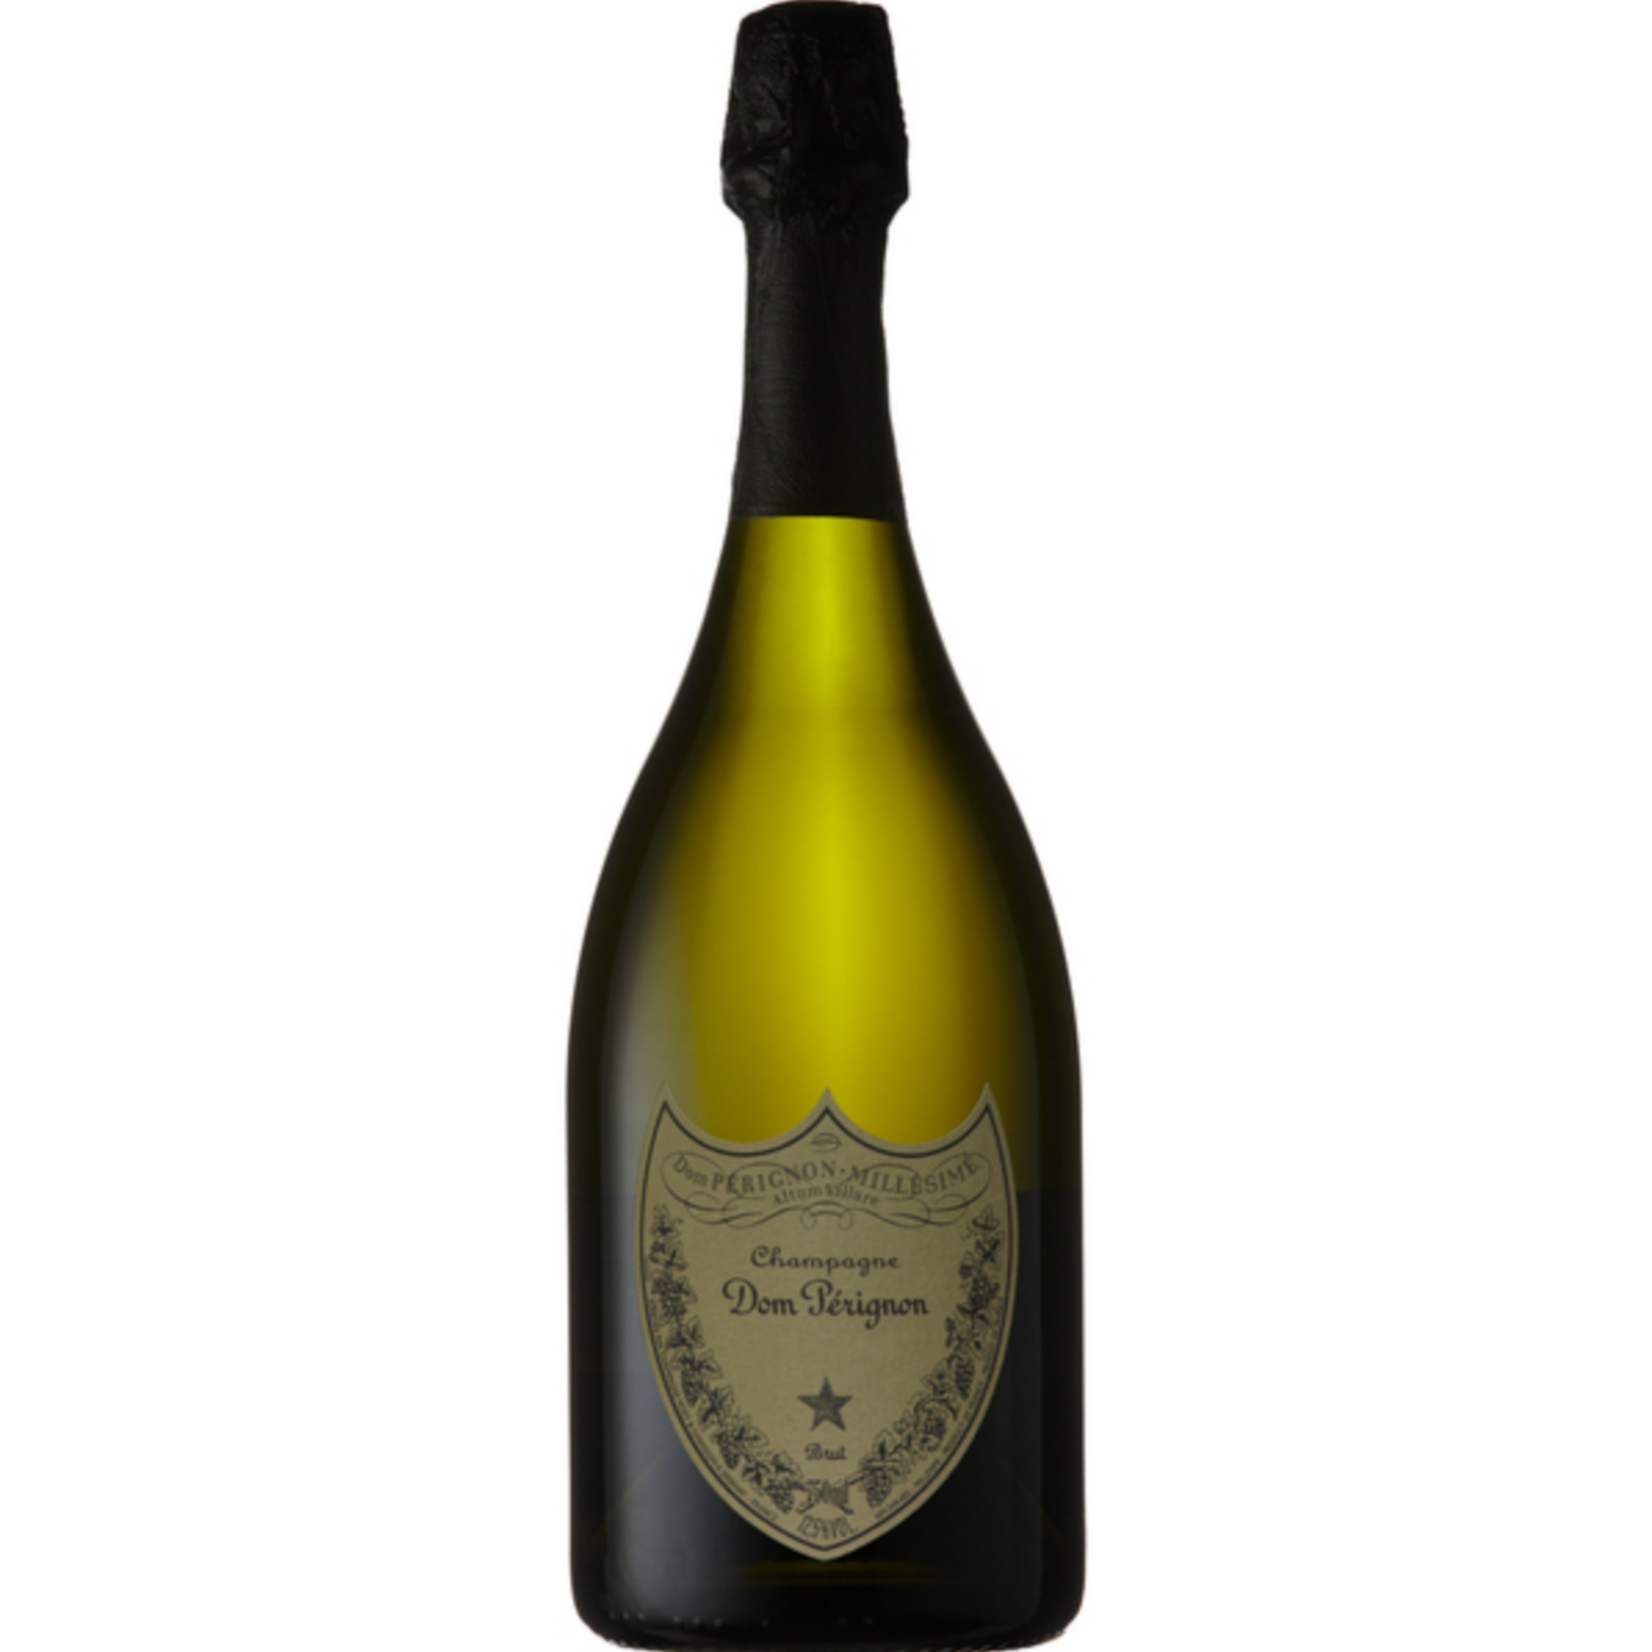 2013, Vintage Dom Perignon Brut, Champagne, Epernay, Champagne, France, 12.5% Alc, CT